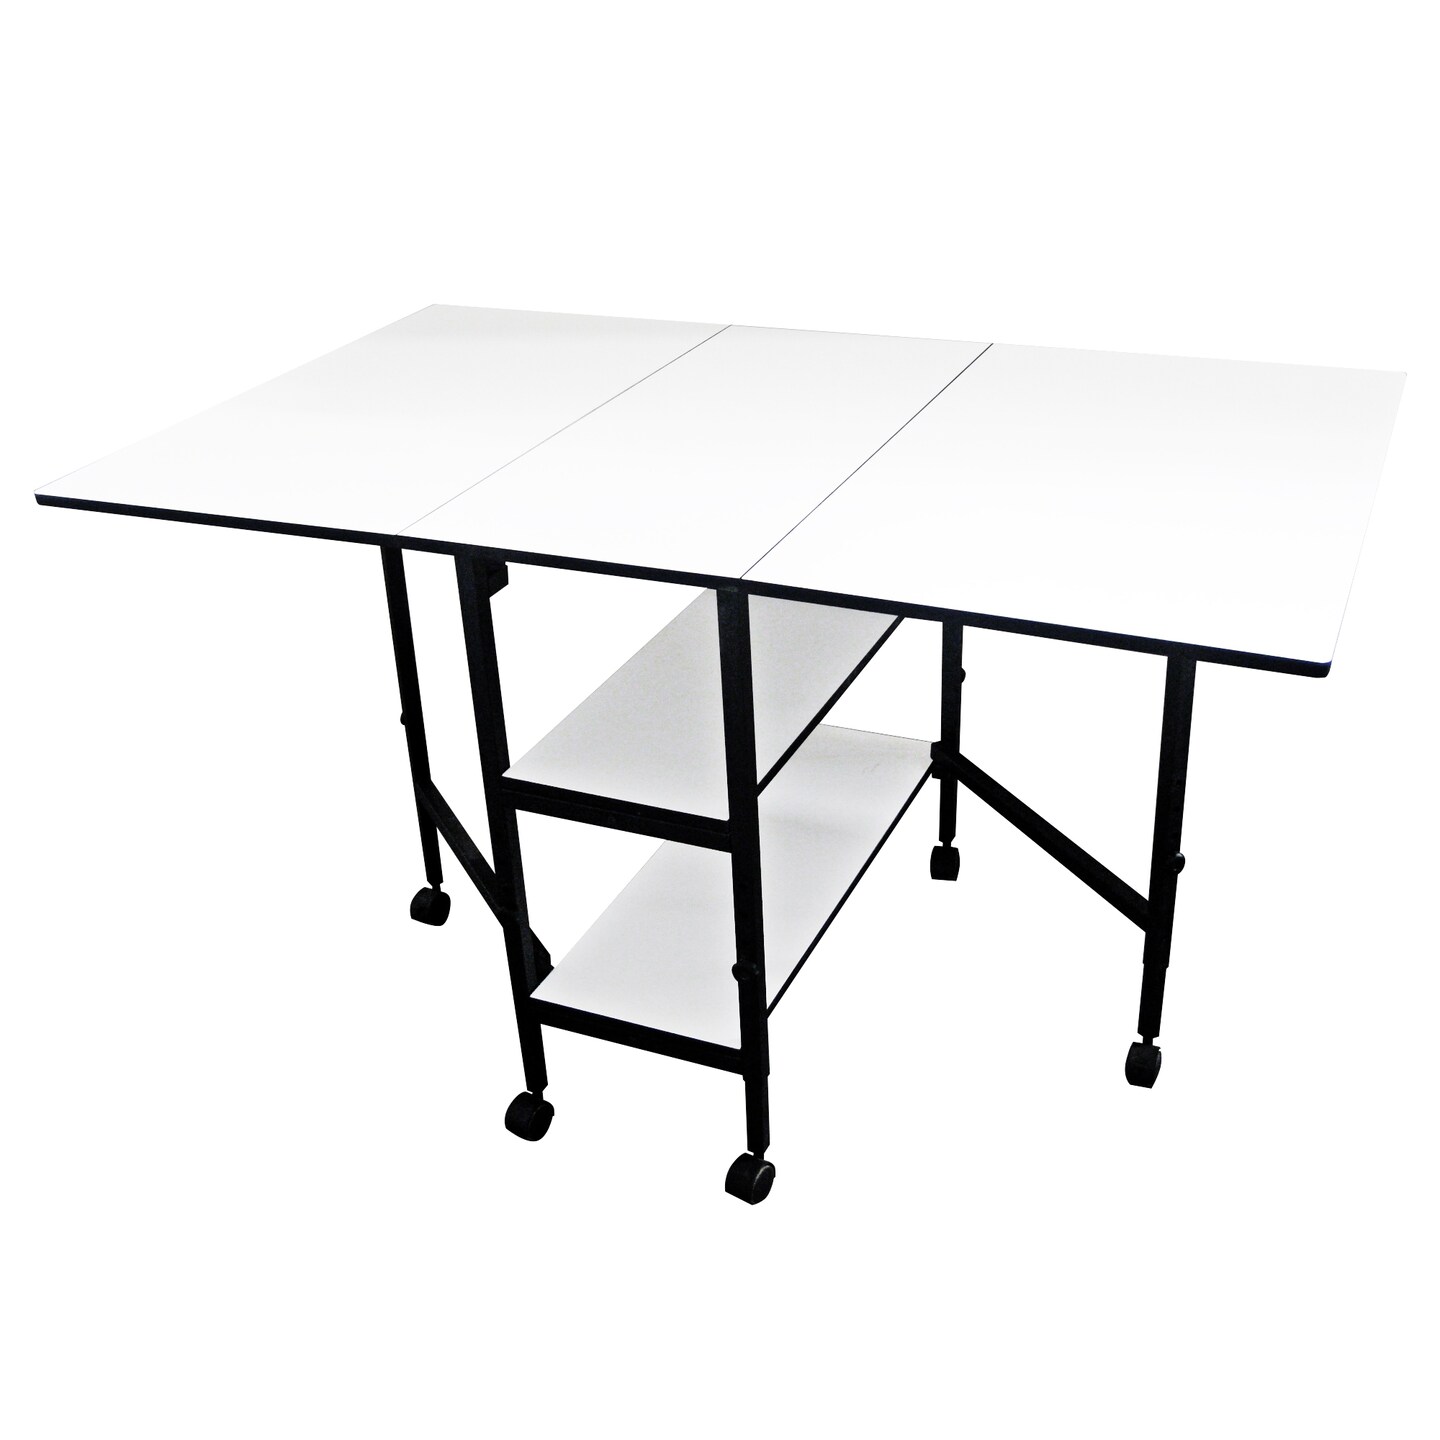 Sullivans Deluxe Cutting Table